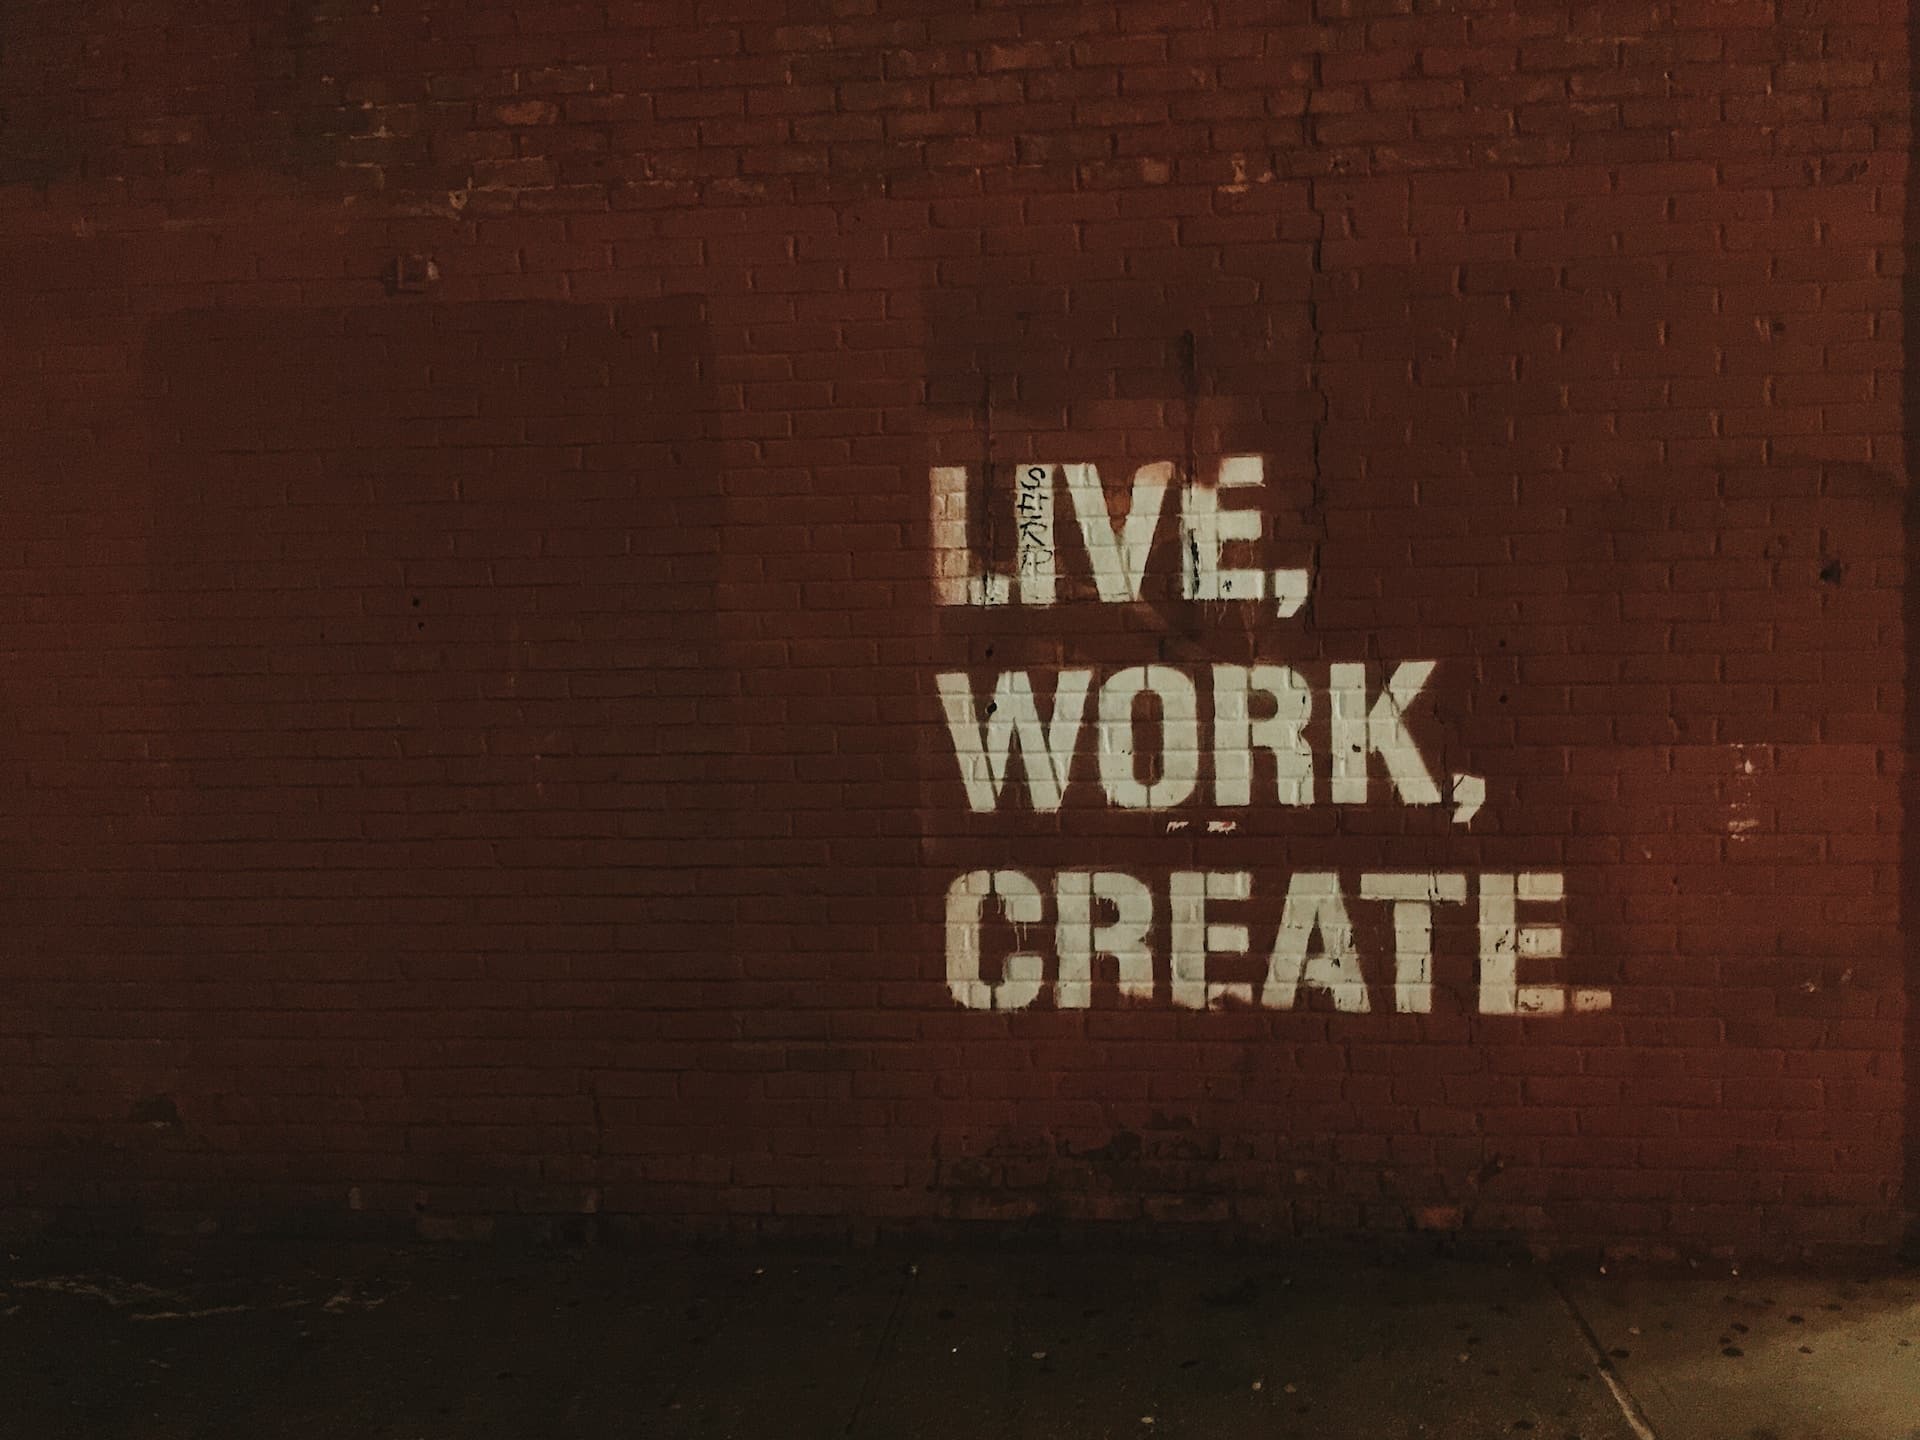 A wall with the words live, work, create written on them